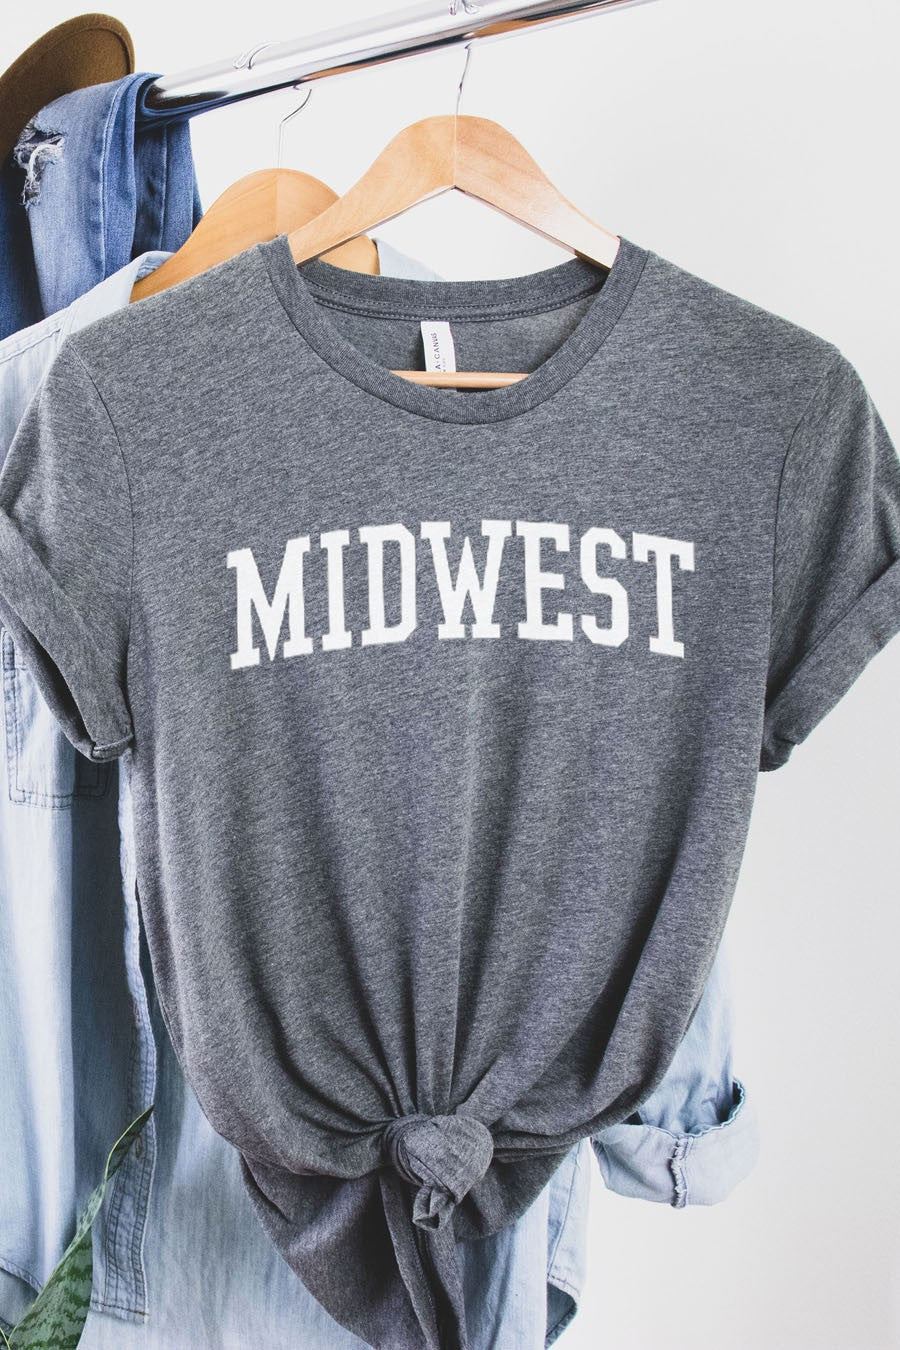 The Midwest Graphic Tee